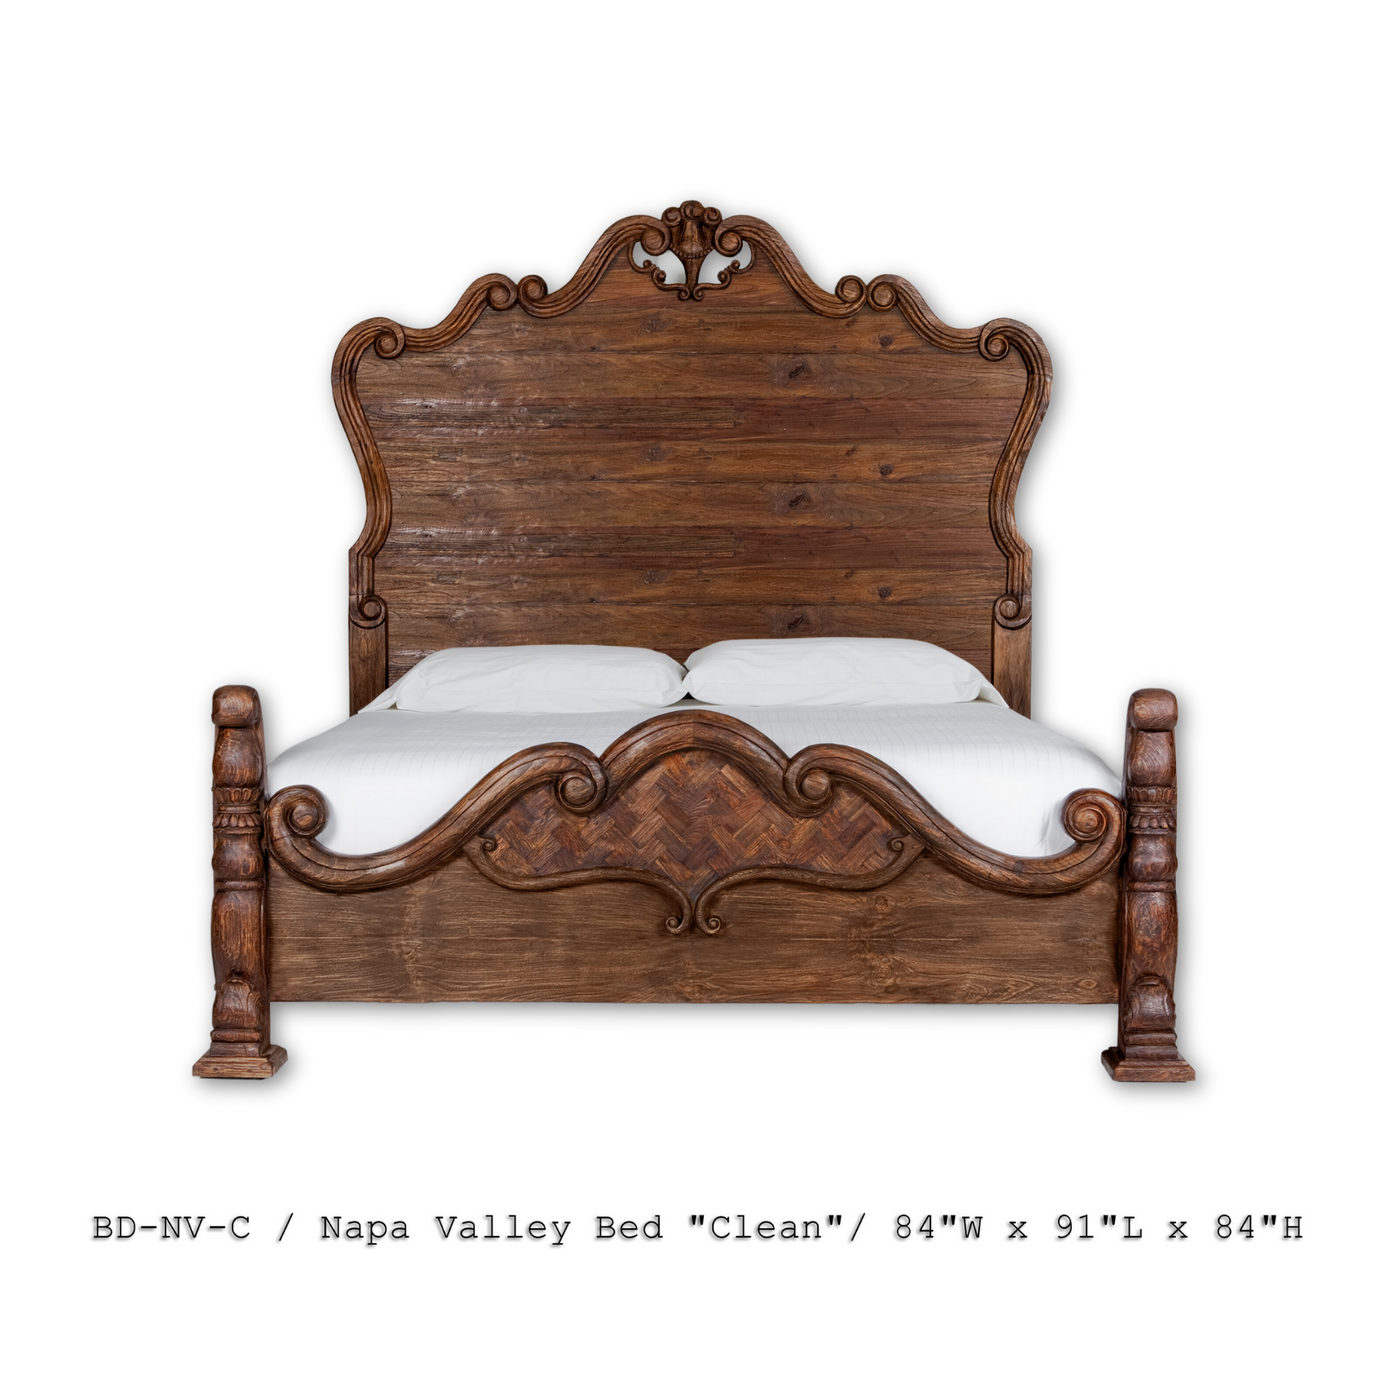 Napa Valley King Bed - Clean Carving